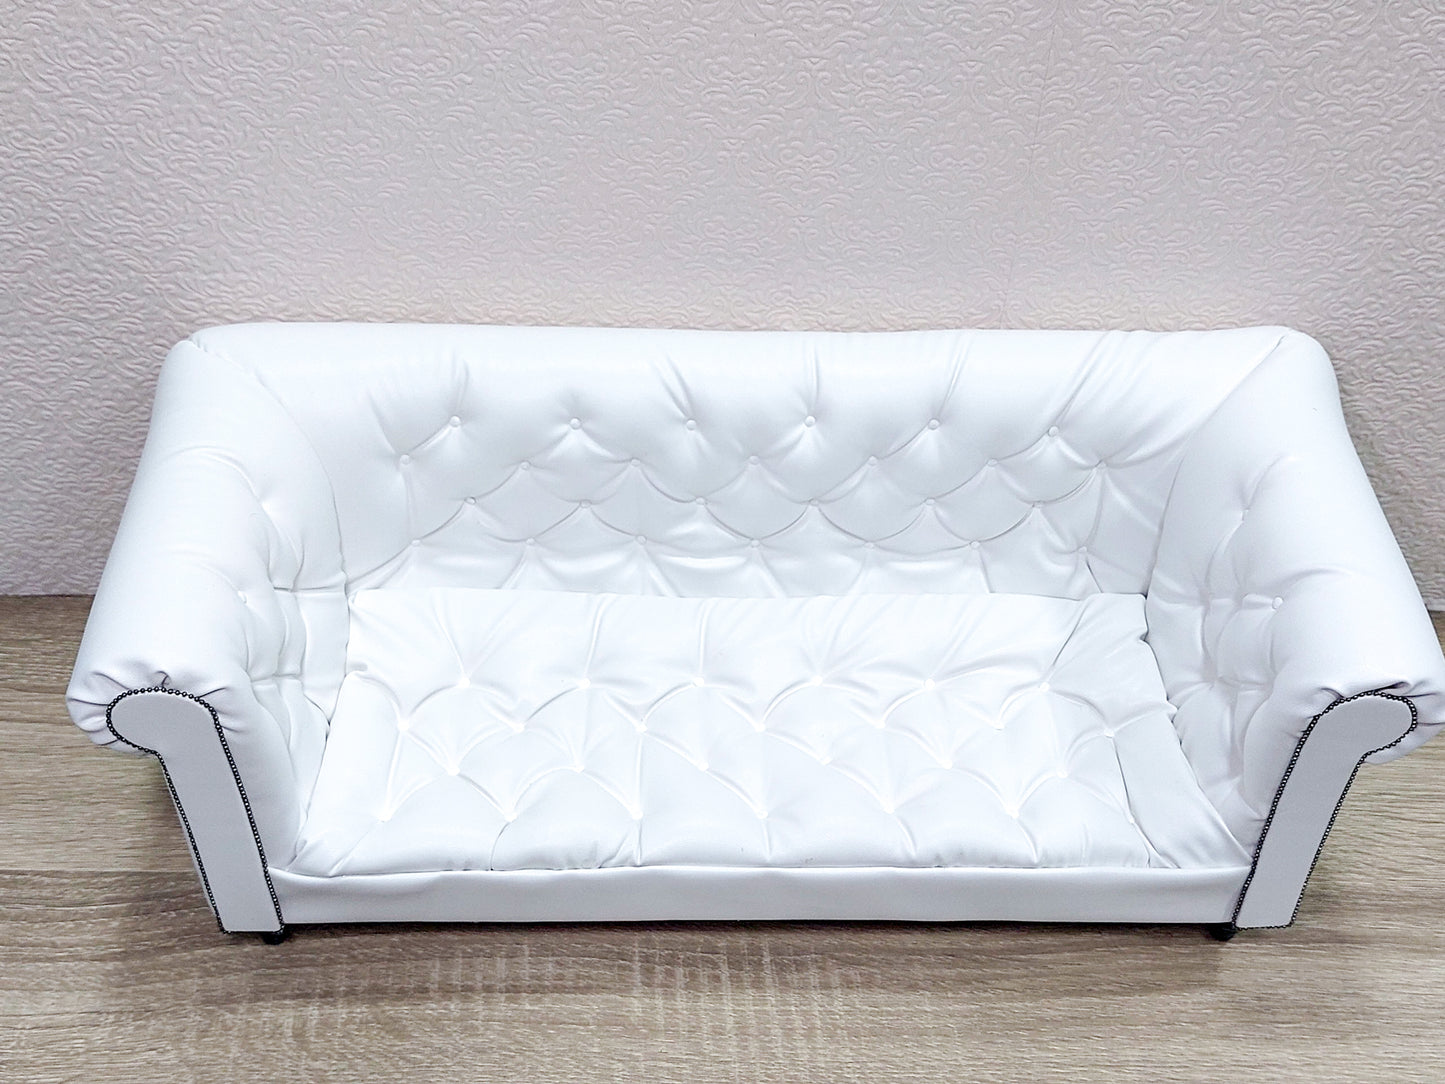 Chesterfield sofa for dolls, artificial leather, white